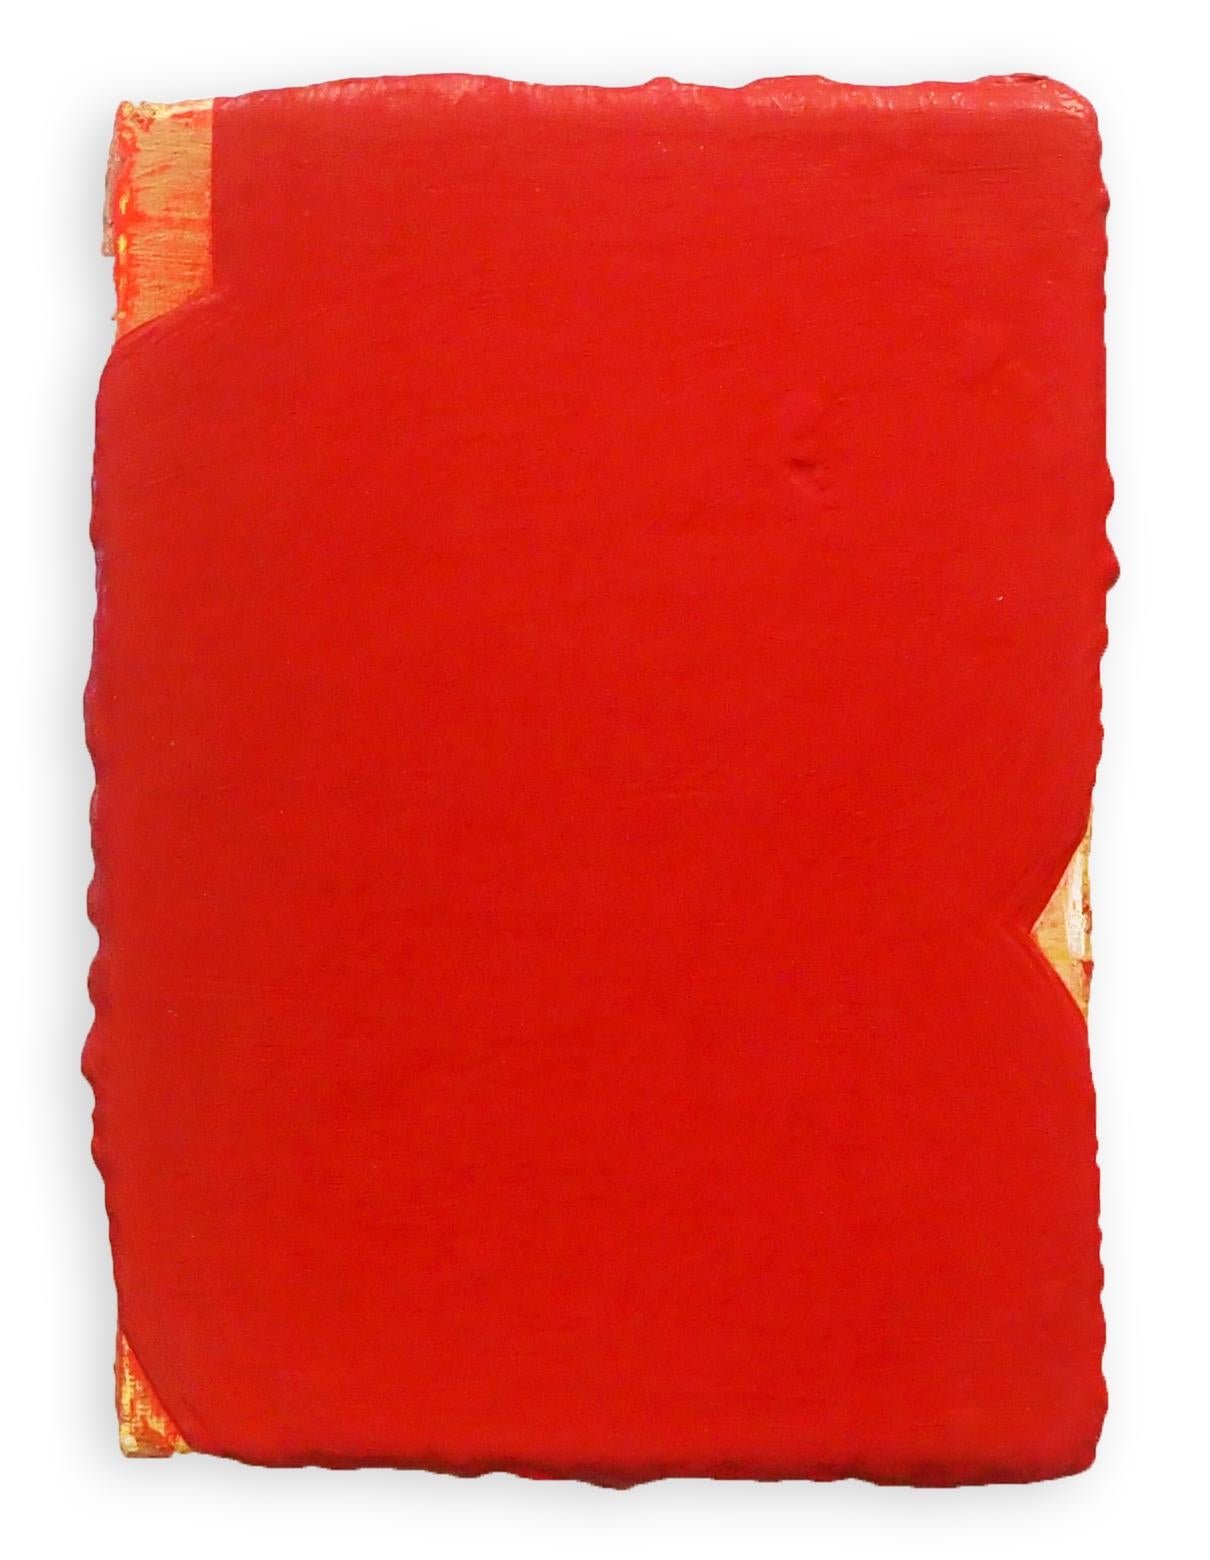 Small Series: Red #229 - Minimalist Mixed Media Art by Laura Nugent